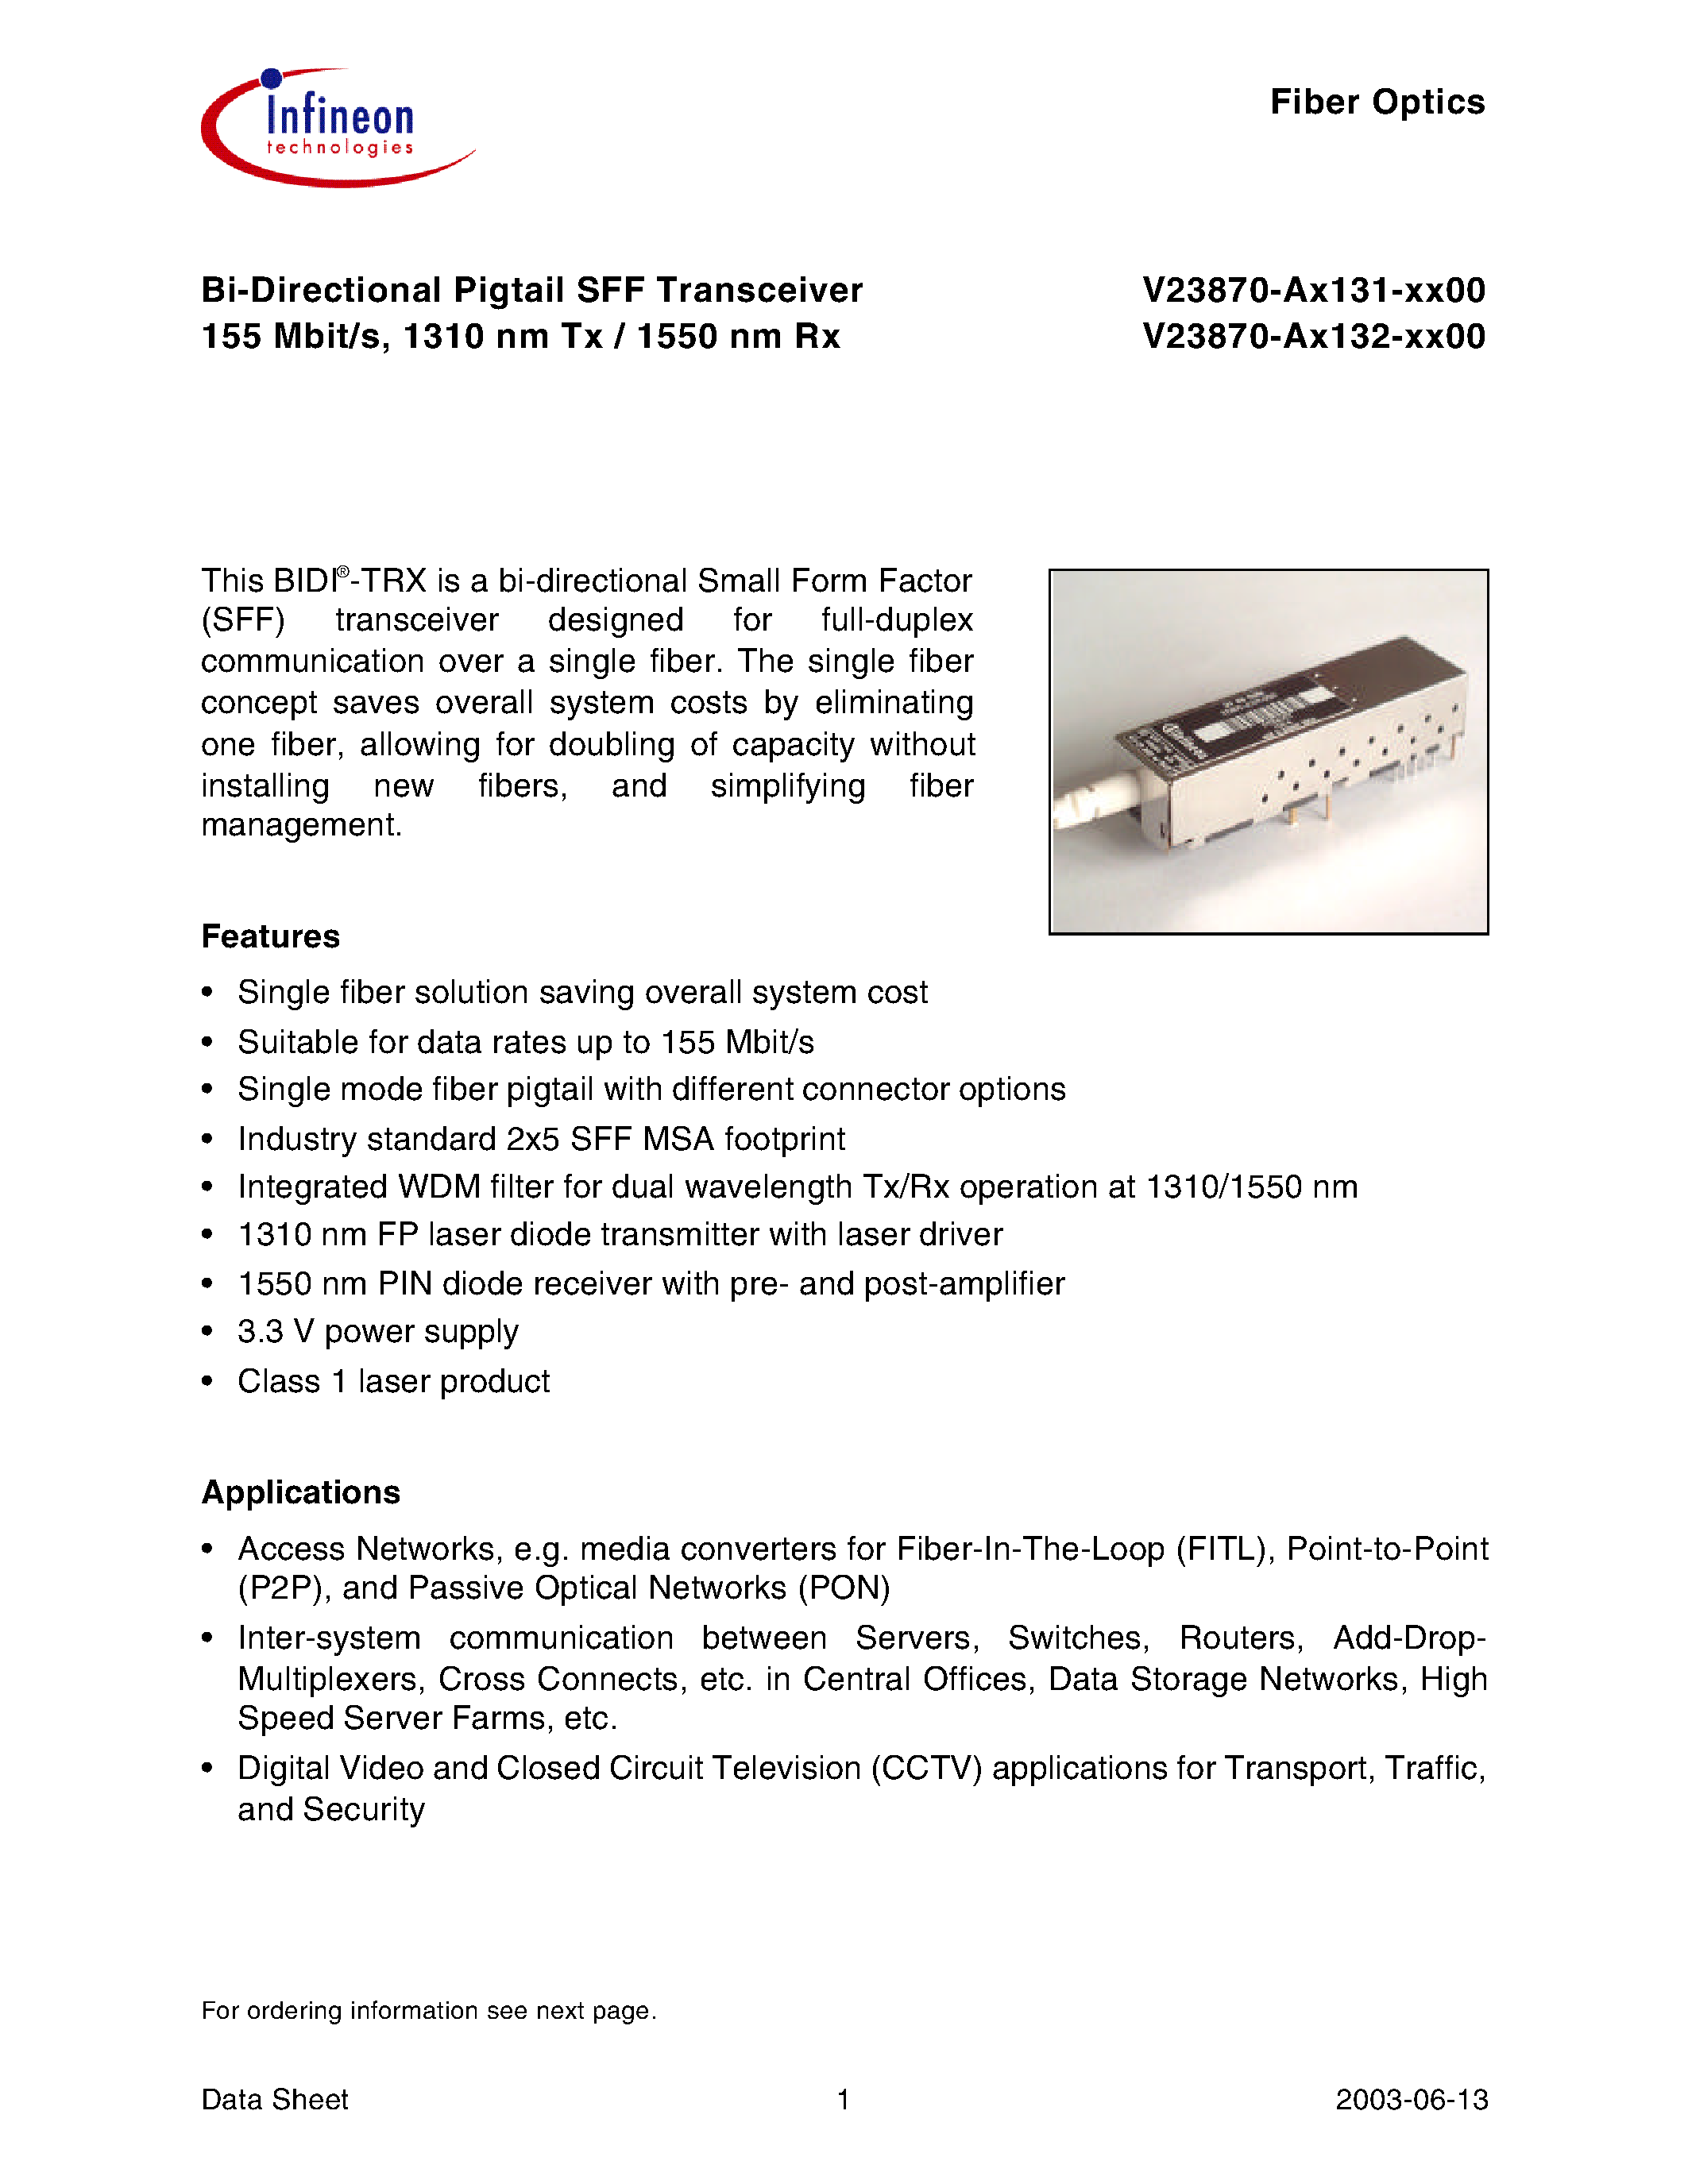 Datasheet V23870-A1132-K600 - Bi-Directional Pigtail SFF Transceiver 155 Mbit/s/ 1310 nm Tx / 1550 nm Rx page 1